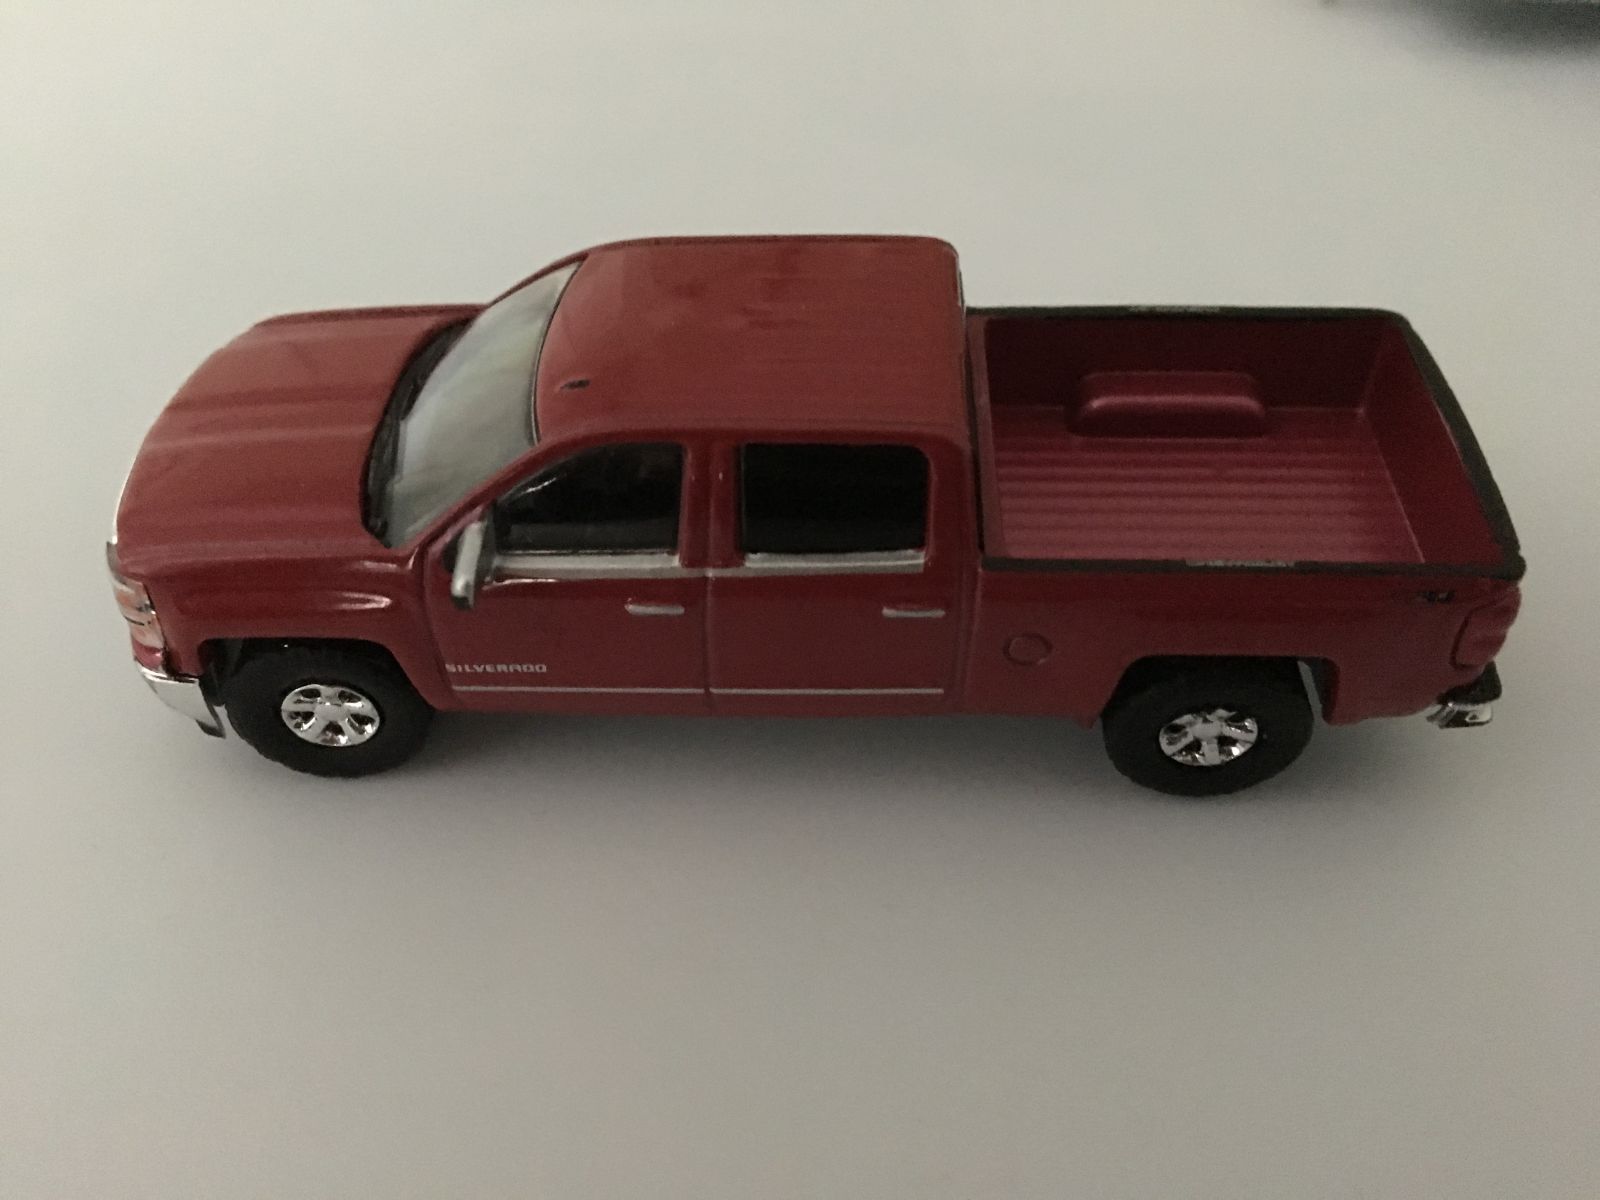 Illustration for article titled Greenlight Chevy Silverado+Concession Trailer